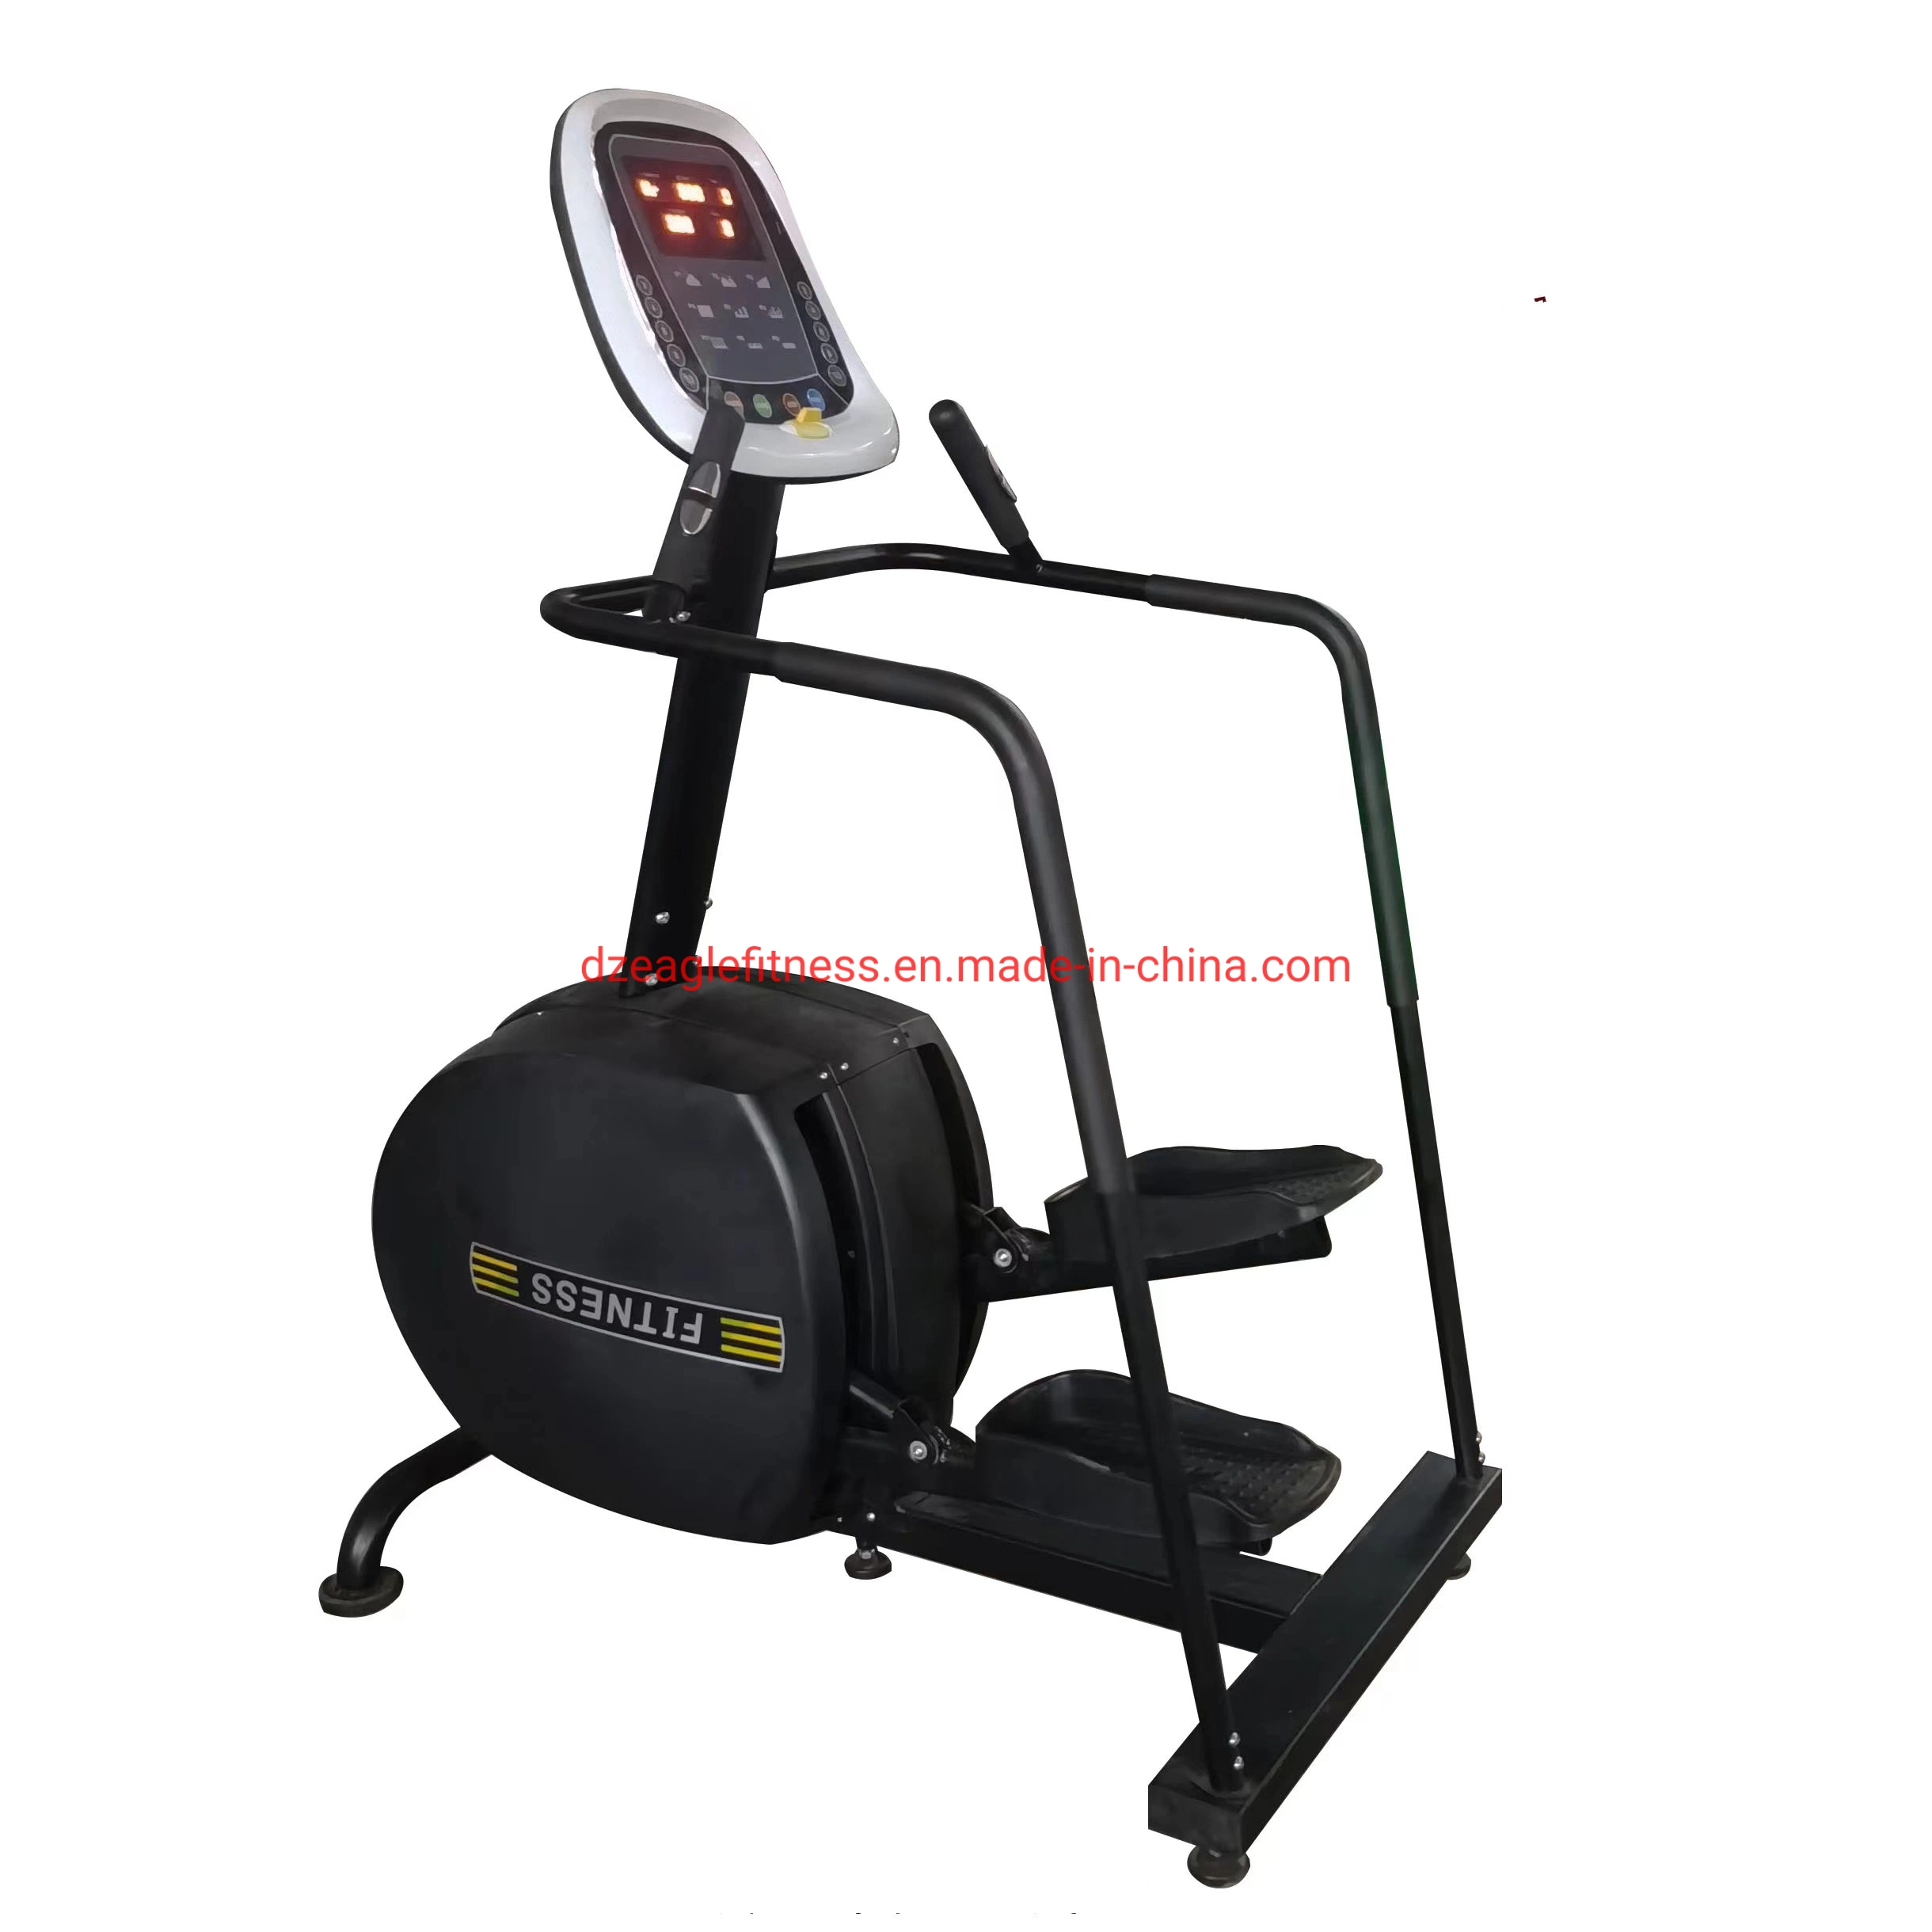 Fitness Magnetic Elliptical Cross Trainer Control Commercial Cardio Gym Equipment Exercise Machine Stair Mill Stepper